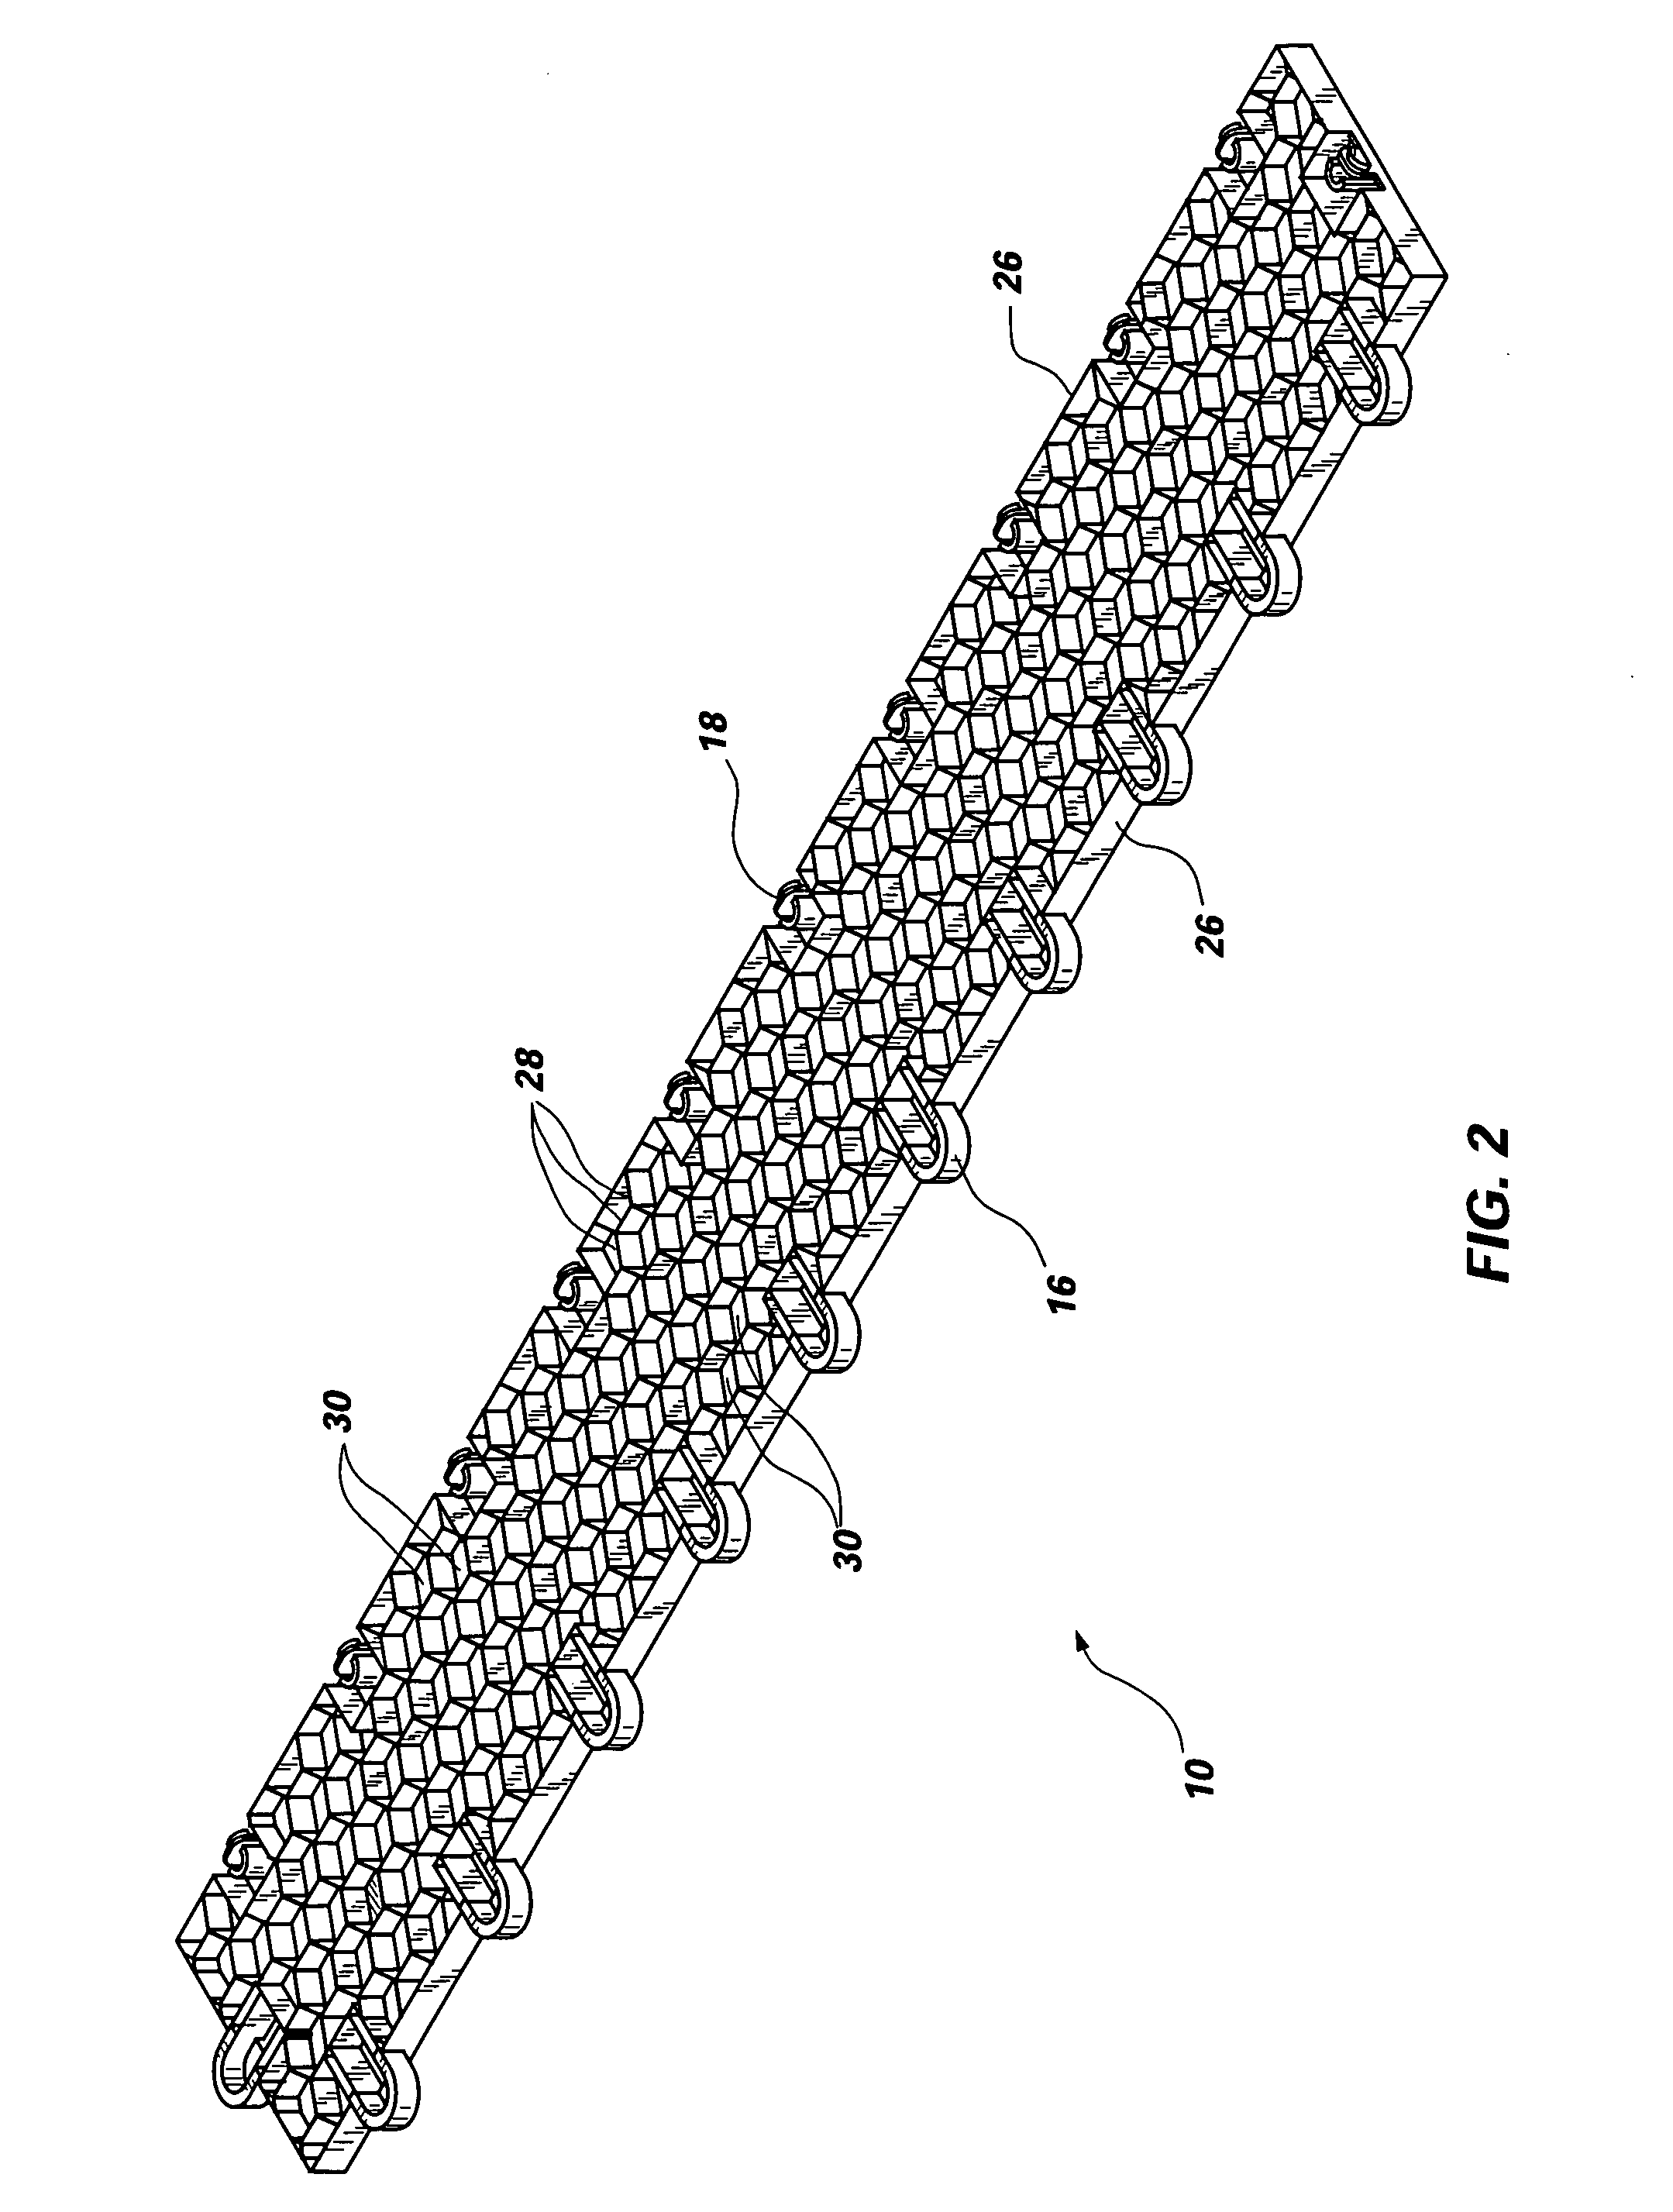 Interlocking floorboard tile system and method of manufacture